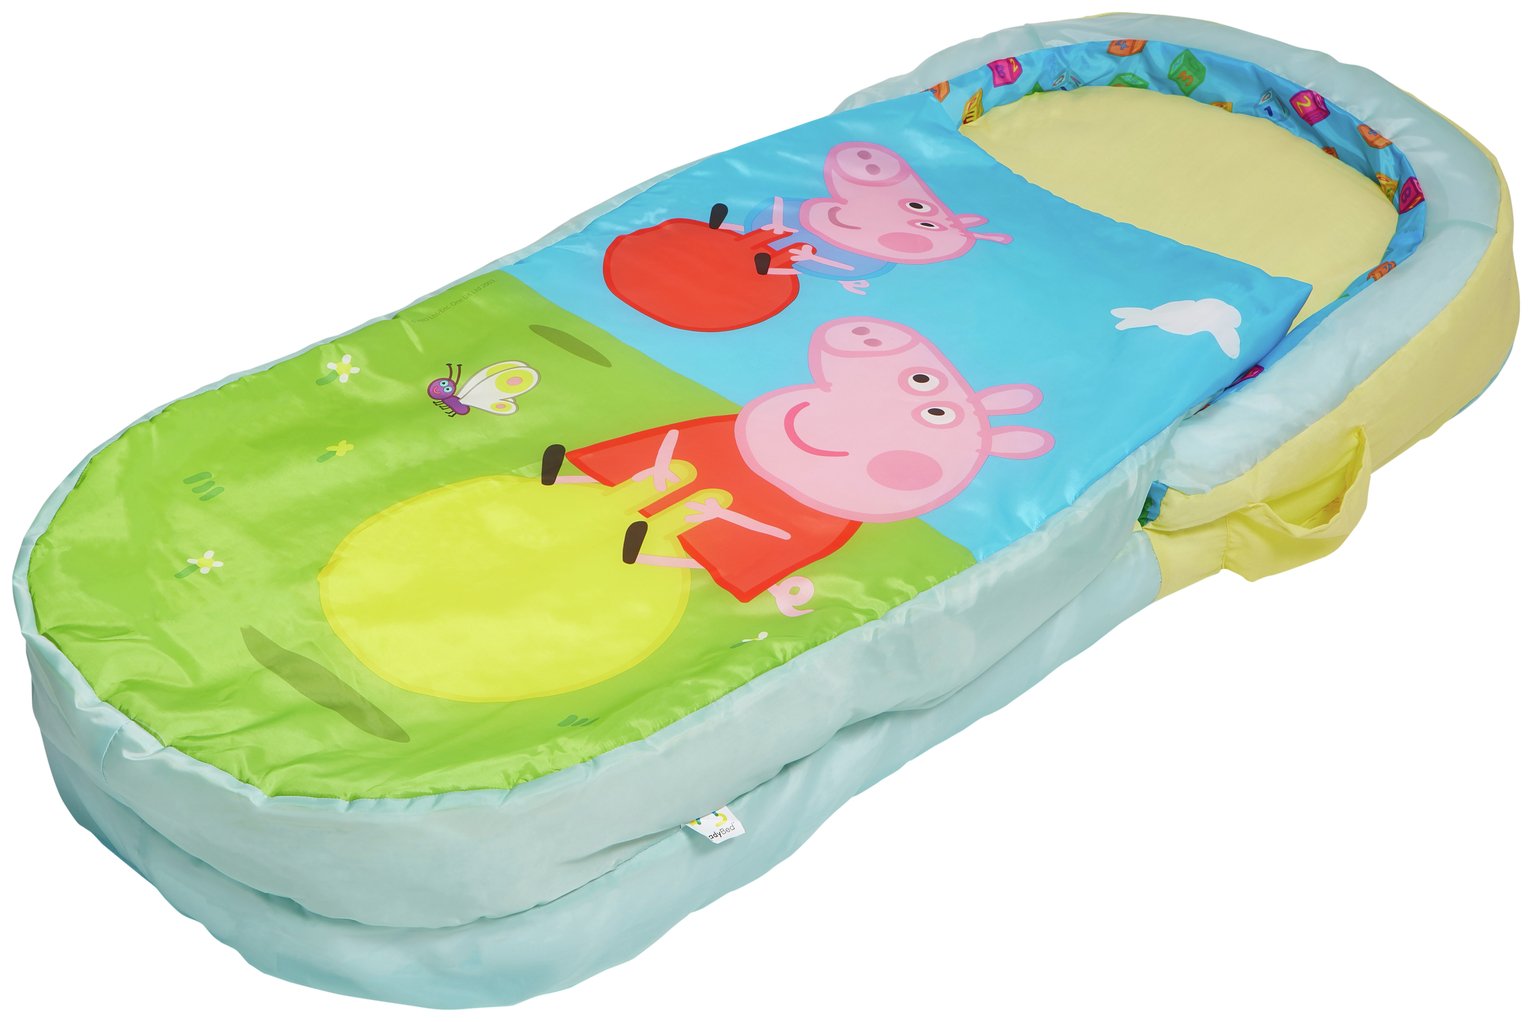 readybed BNIP Ready Bed Junior All In One Air Bed & Sleeping Bag